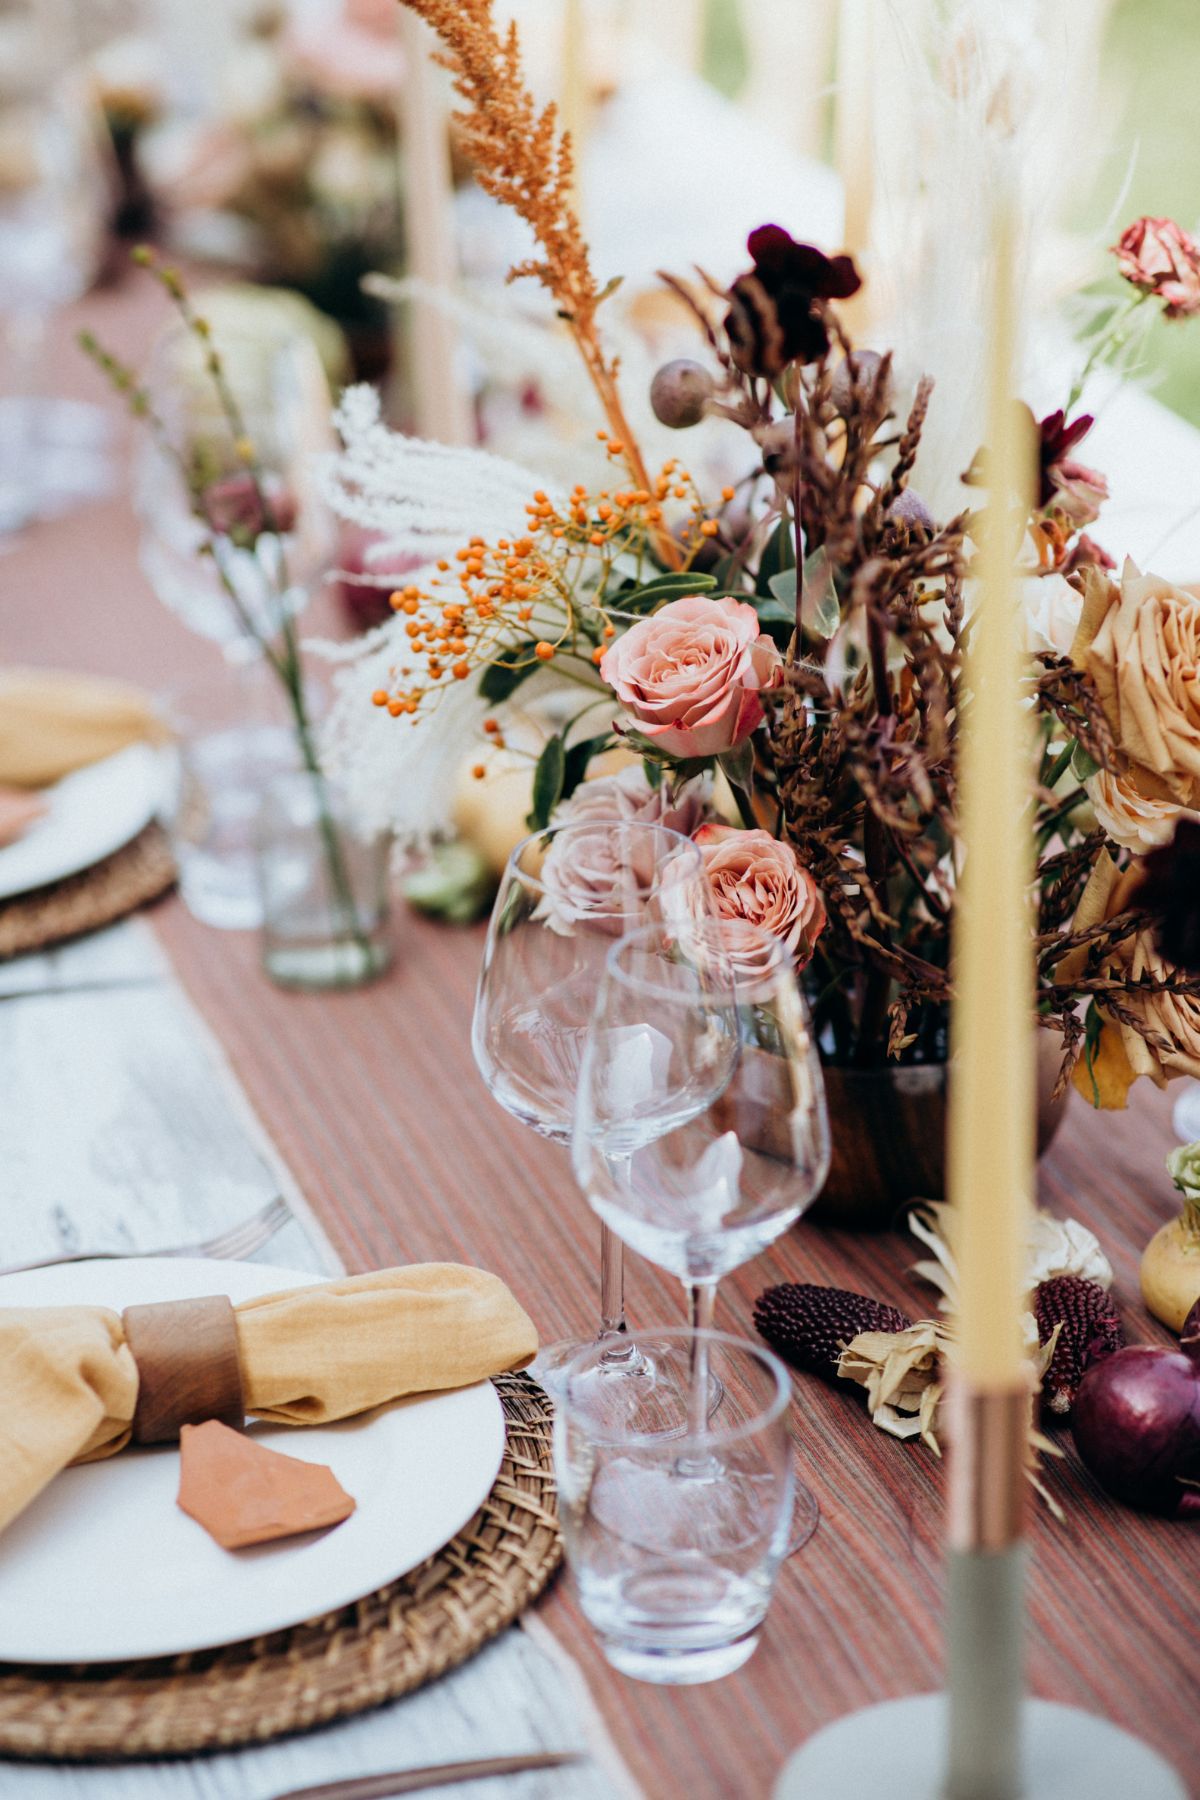 Wedding Planning Without A Planner